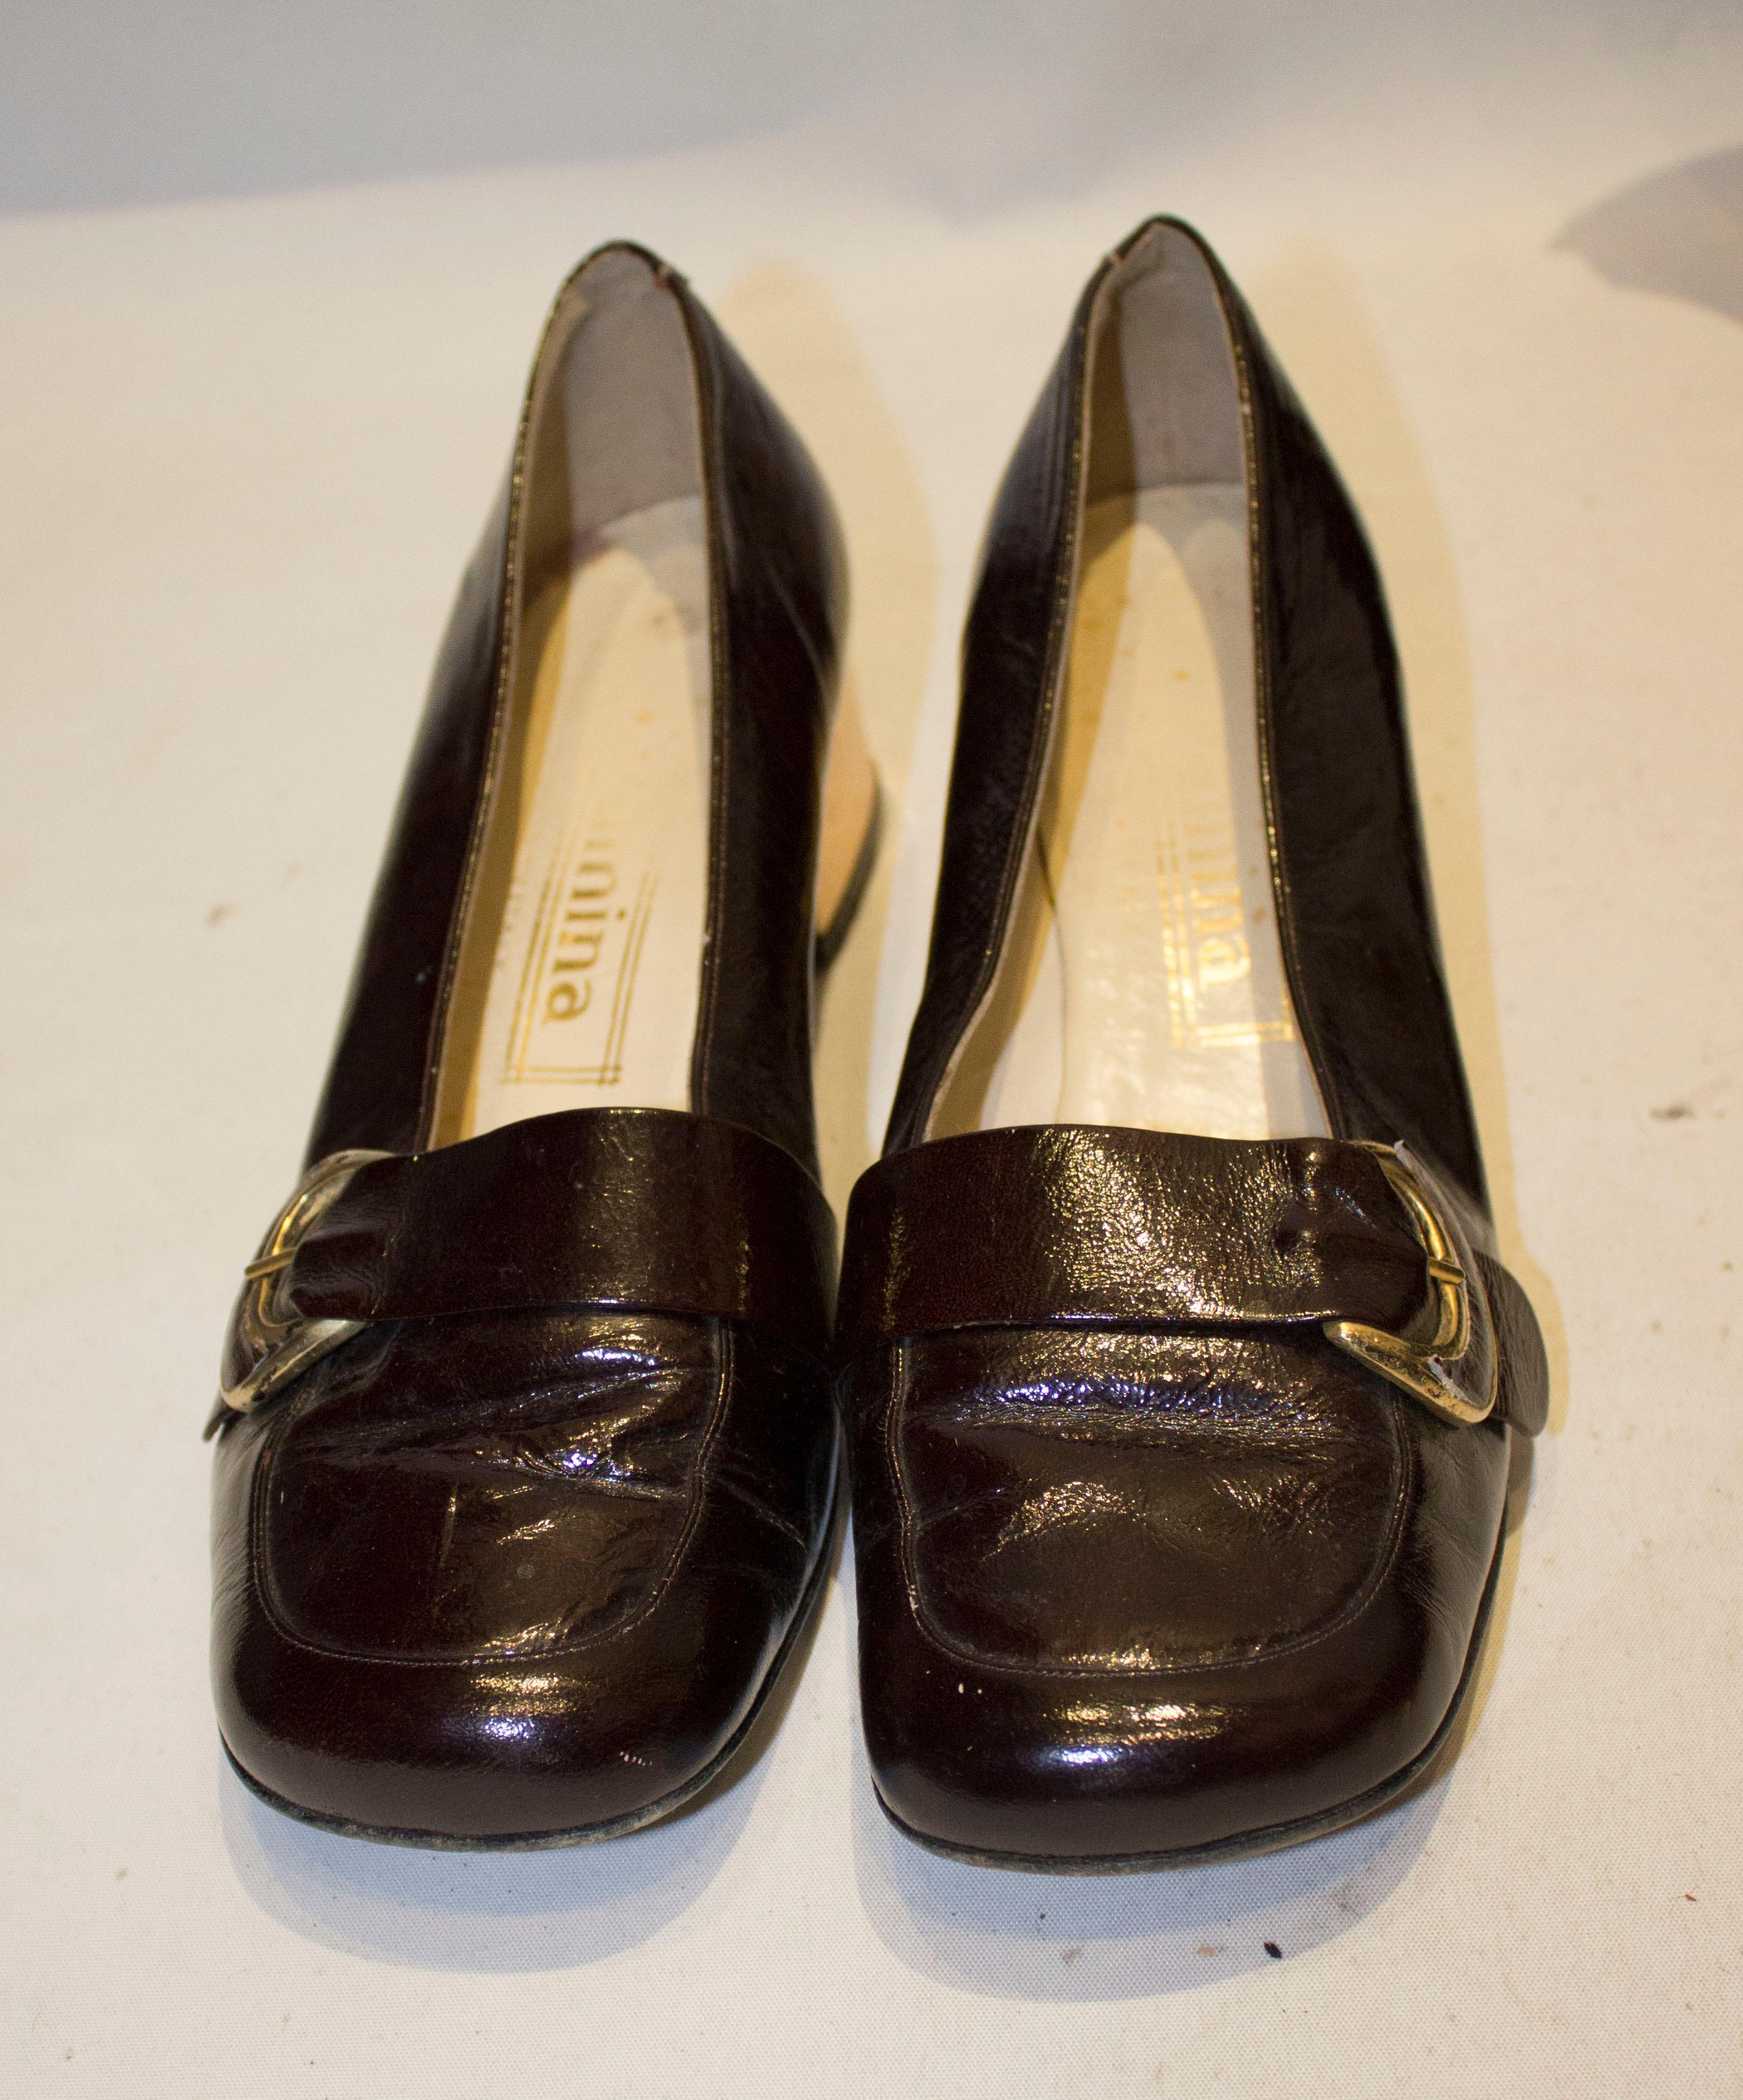 A fun pair of Italian vintage shoes. The  shoes are marked a size 38 1/2, have a 2'' gold heel and a buckle.